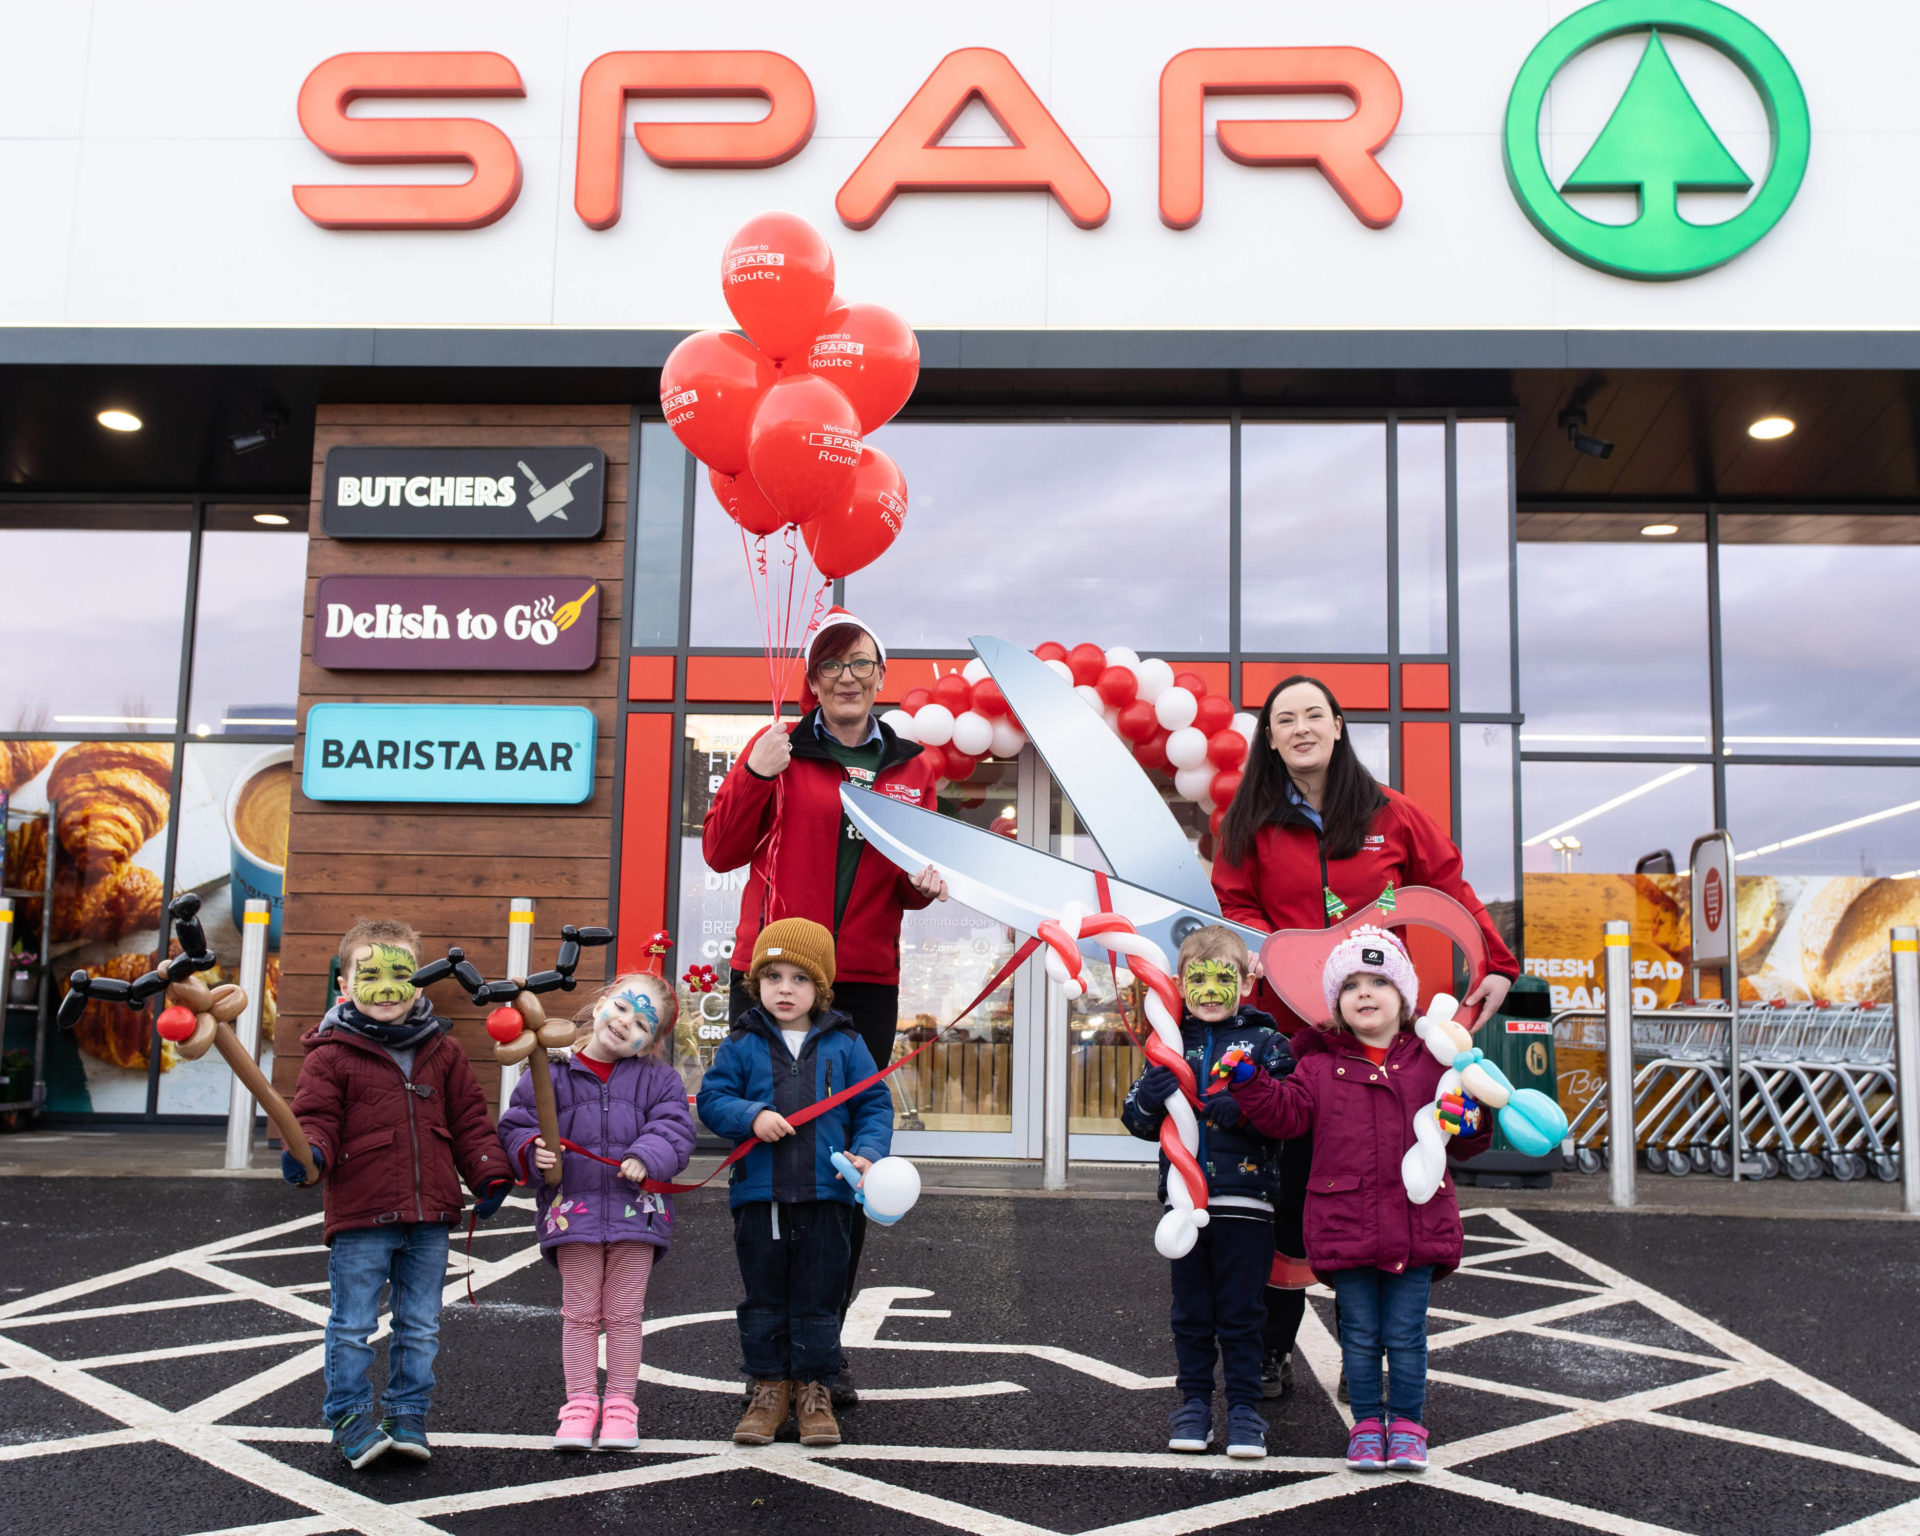 SPAR service station in Ballymoney reopens as brand new fresh food hall